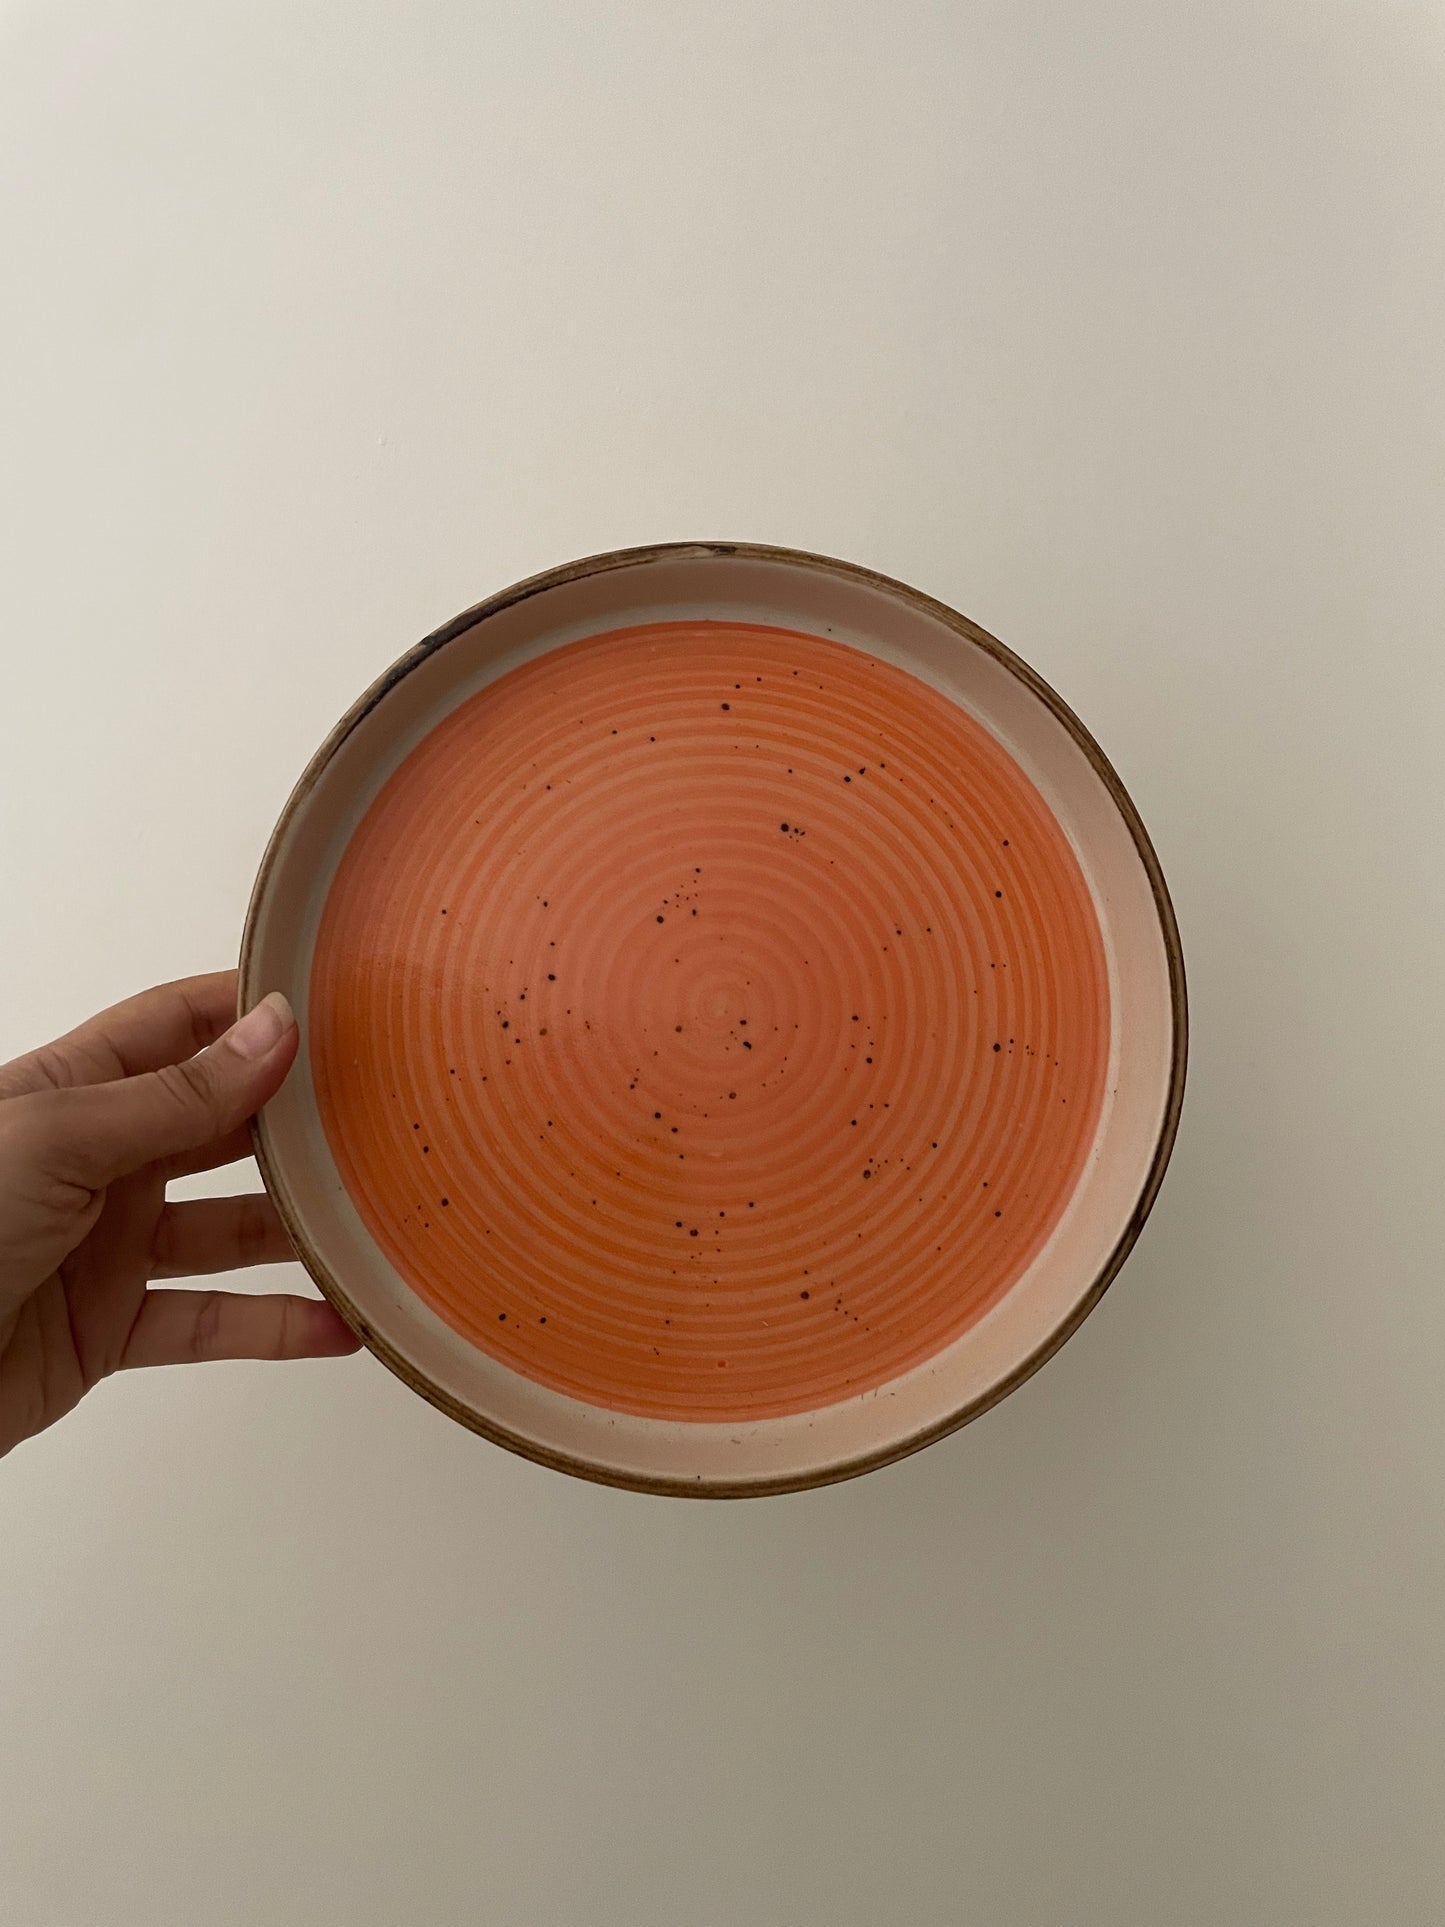 Hand holding upright a ceramic orange plate with white border, brown freckle design, and brown rim. Buy tableware online in India.